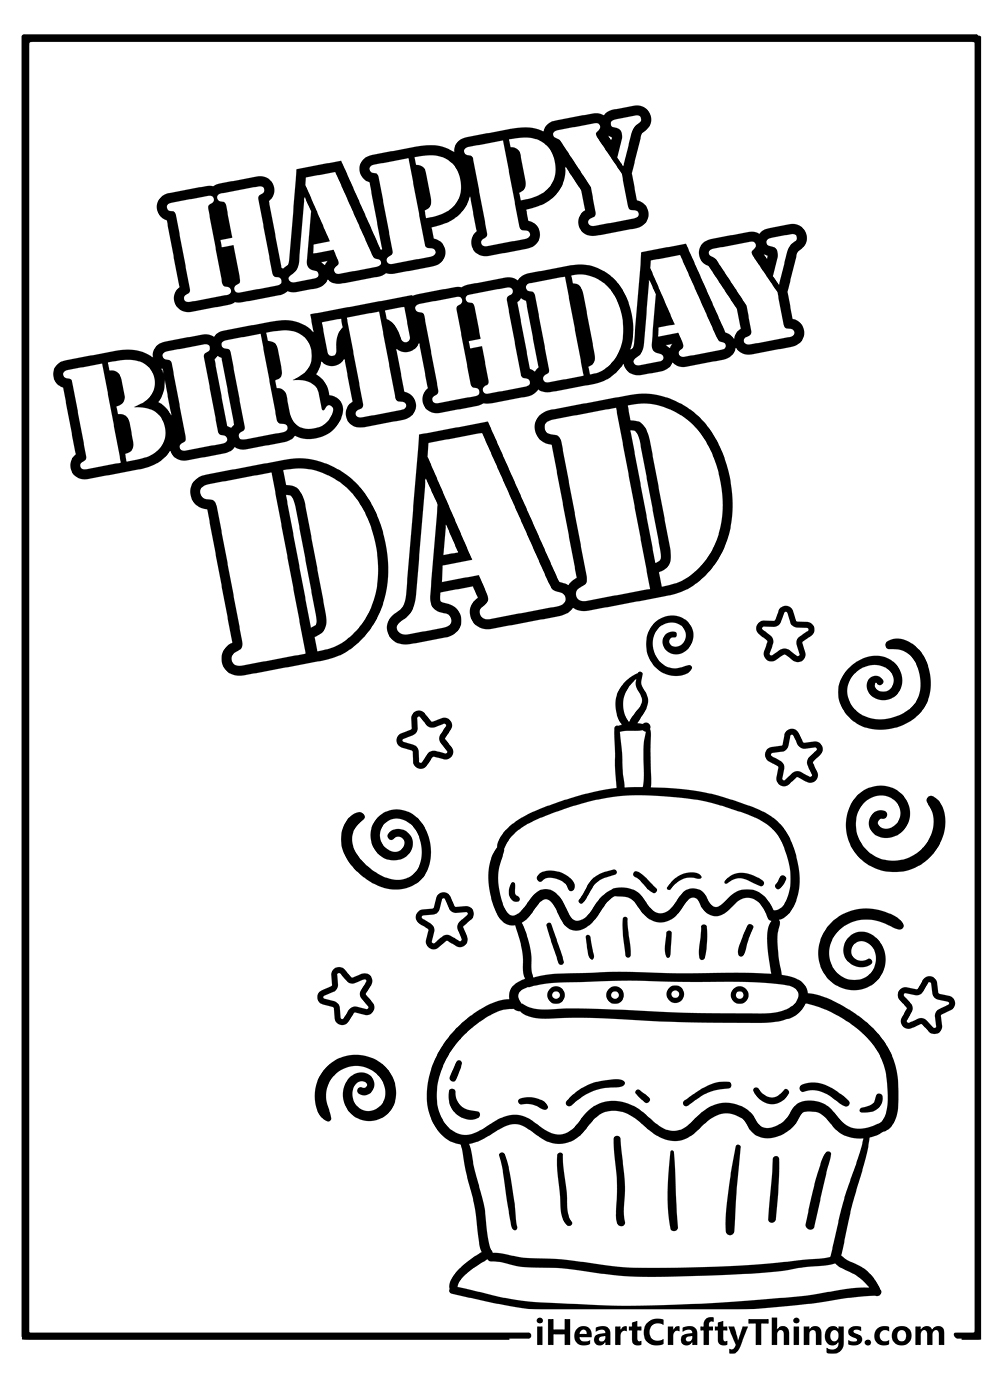 Happy Birthday Dad Coloring Book for kids free printable